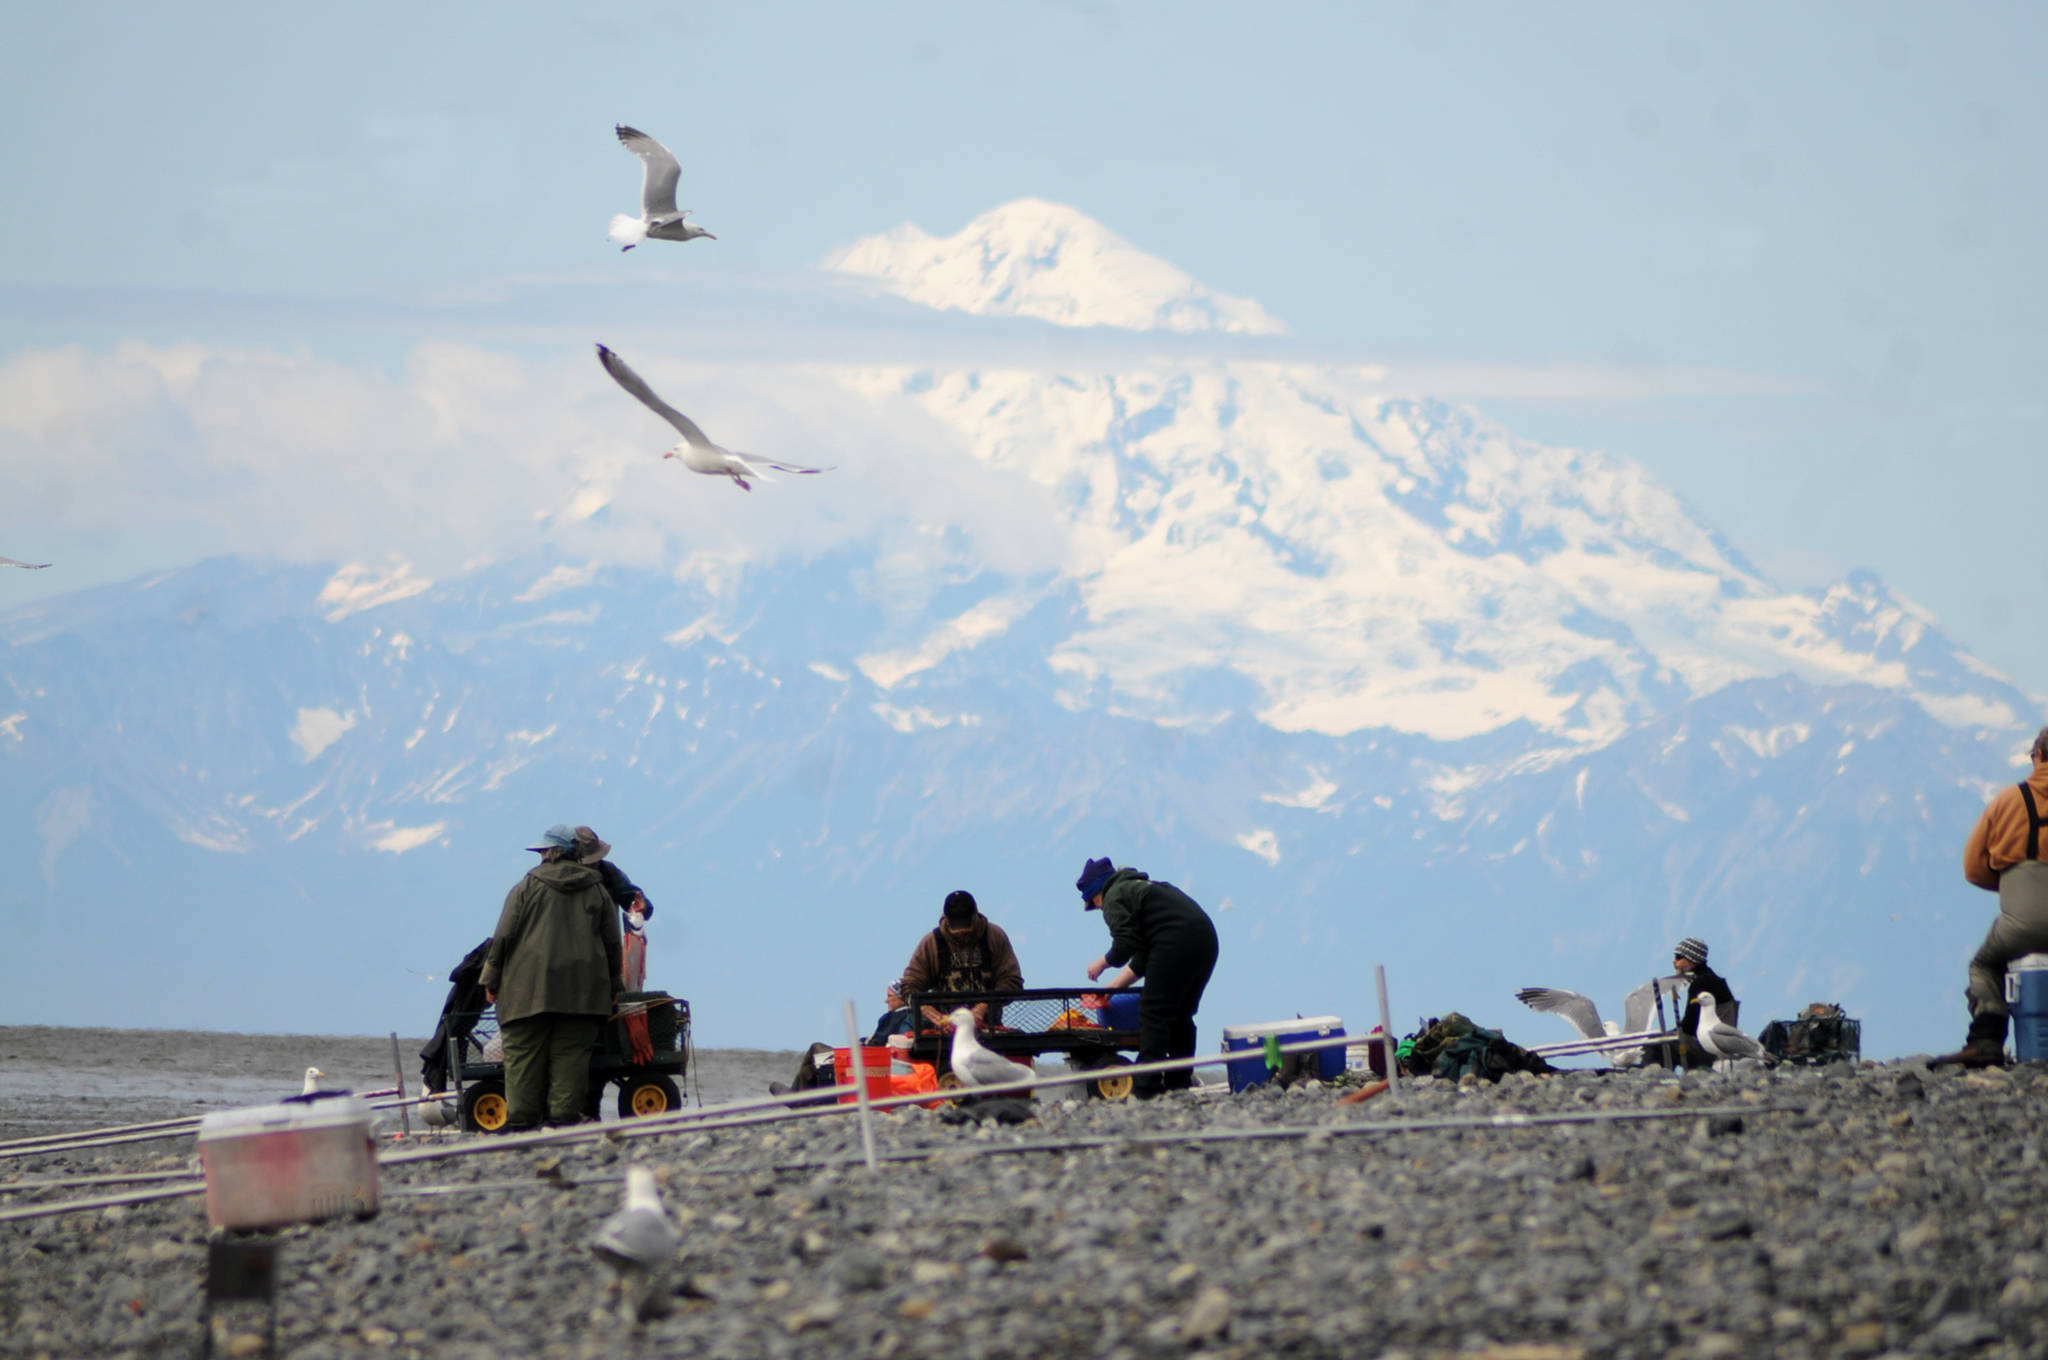 Mt. Redoubt looms over dipnetters on the north Kenai Beach on Tuesday, July 11, 2017 in Kenai, Alaska. Tuesday was the second day of the Kenai River personal-use dipnet fishery, which will remain open until July 31. The fishery was relatively quiet Tuesday, with a dipnetter hauling in a fish every once in awhile, and unlike many July weekends, there was plenty of room in the water for more participants. Sockeye salmon have been relatively slow to enter the Kenai this year, with about 94,885 past the Alaska Department of Fish and Game’s sonar as of Monday, significantly less than in 2016 but ahead of years like 2013, 2012 and 2011, according to Fish and Game data. (Photo by Elizabeth Earl/Peninsula Clarion)